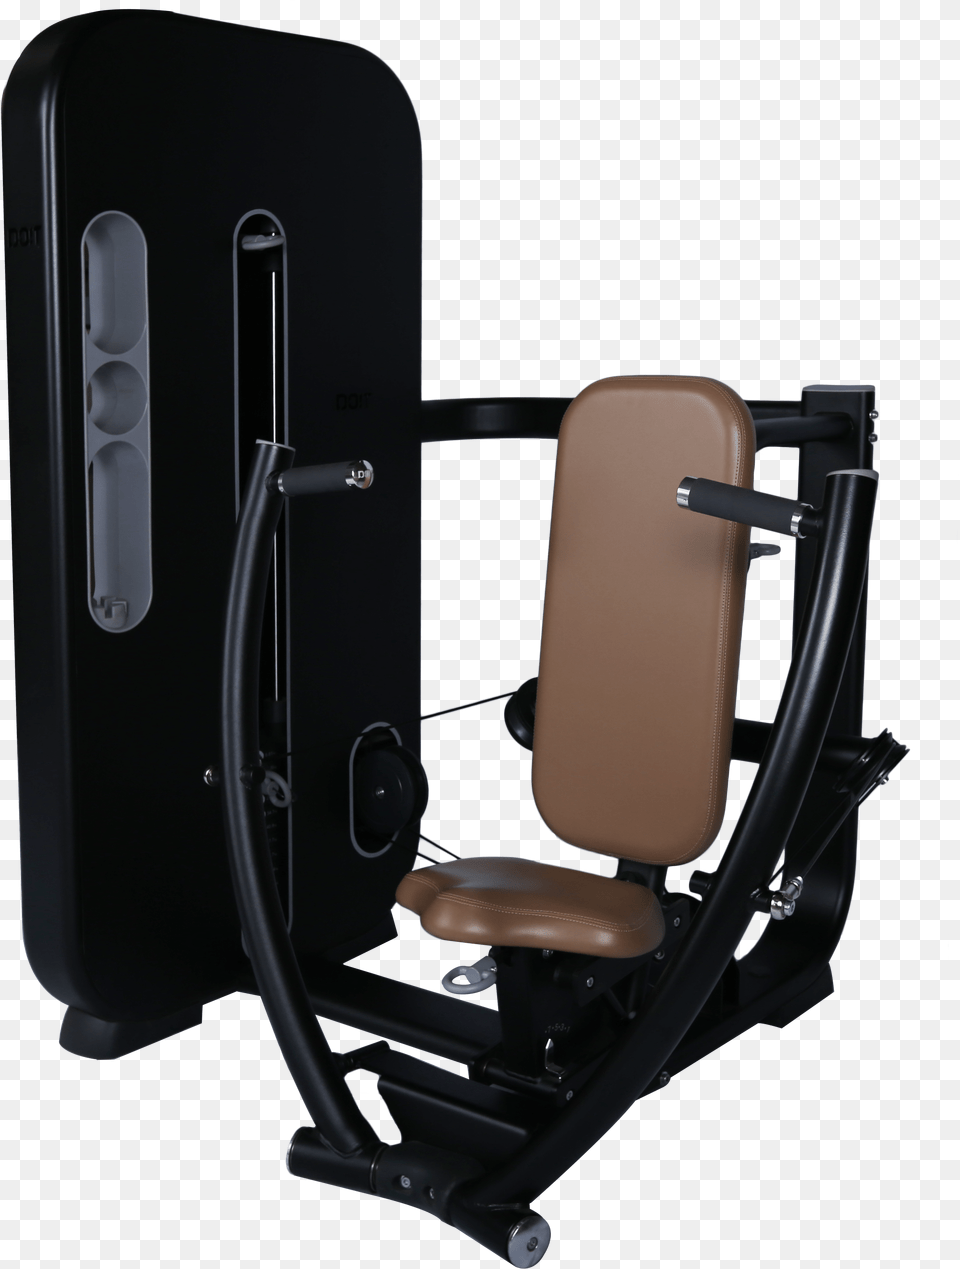 Chest Press Not Web Chair, Cushion, Home Decor, Furniture, Headrest Png